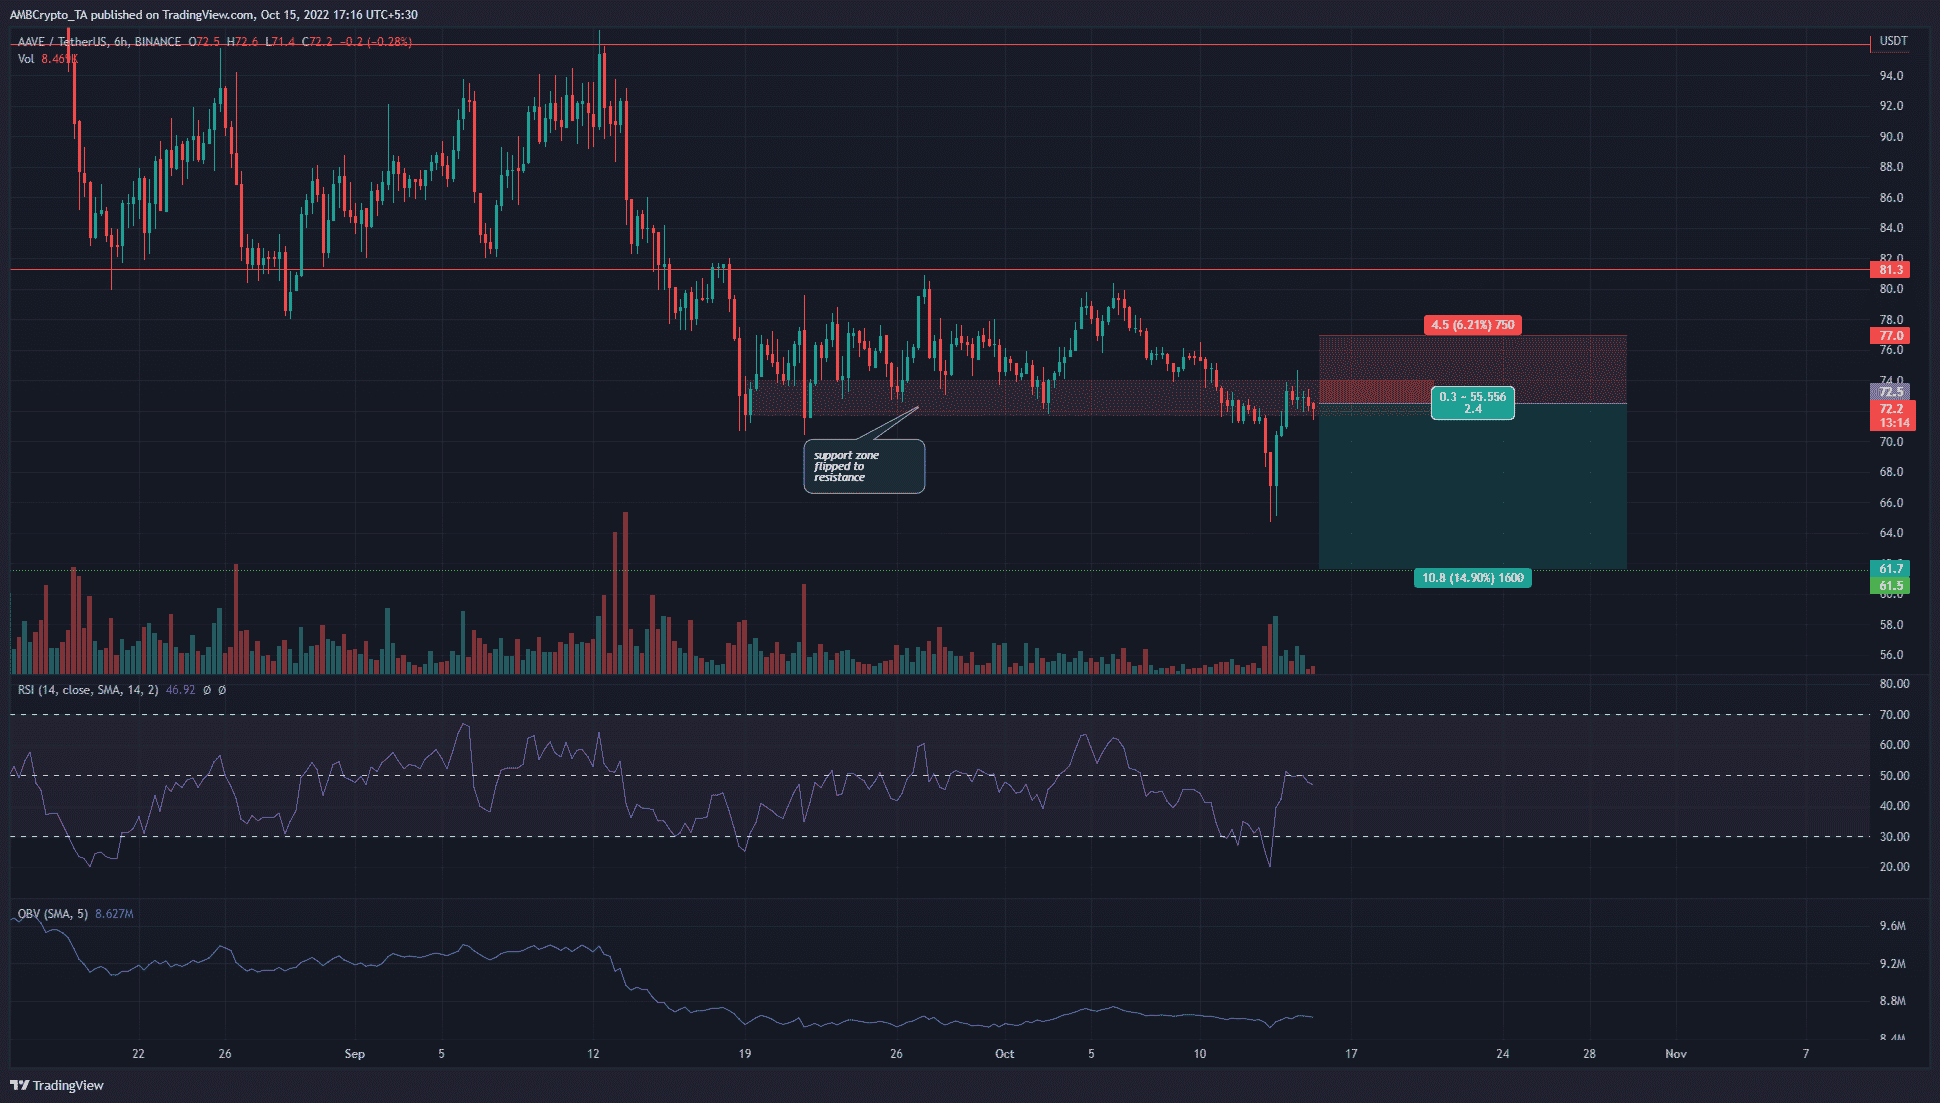 AAVE shows weakness on the charts after the rejection at $75